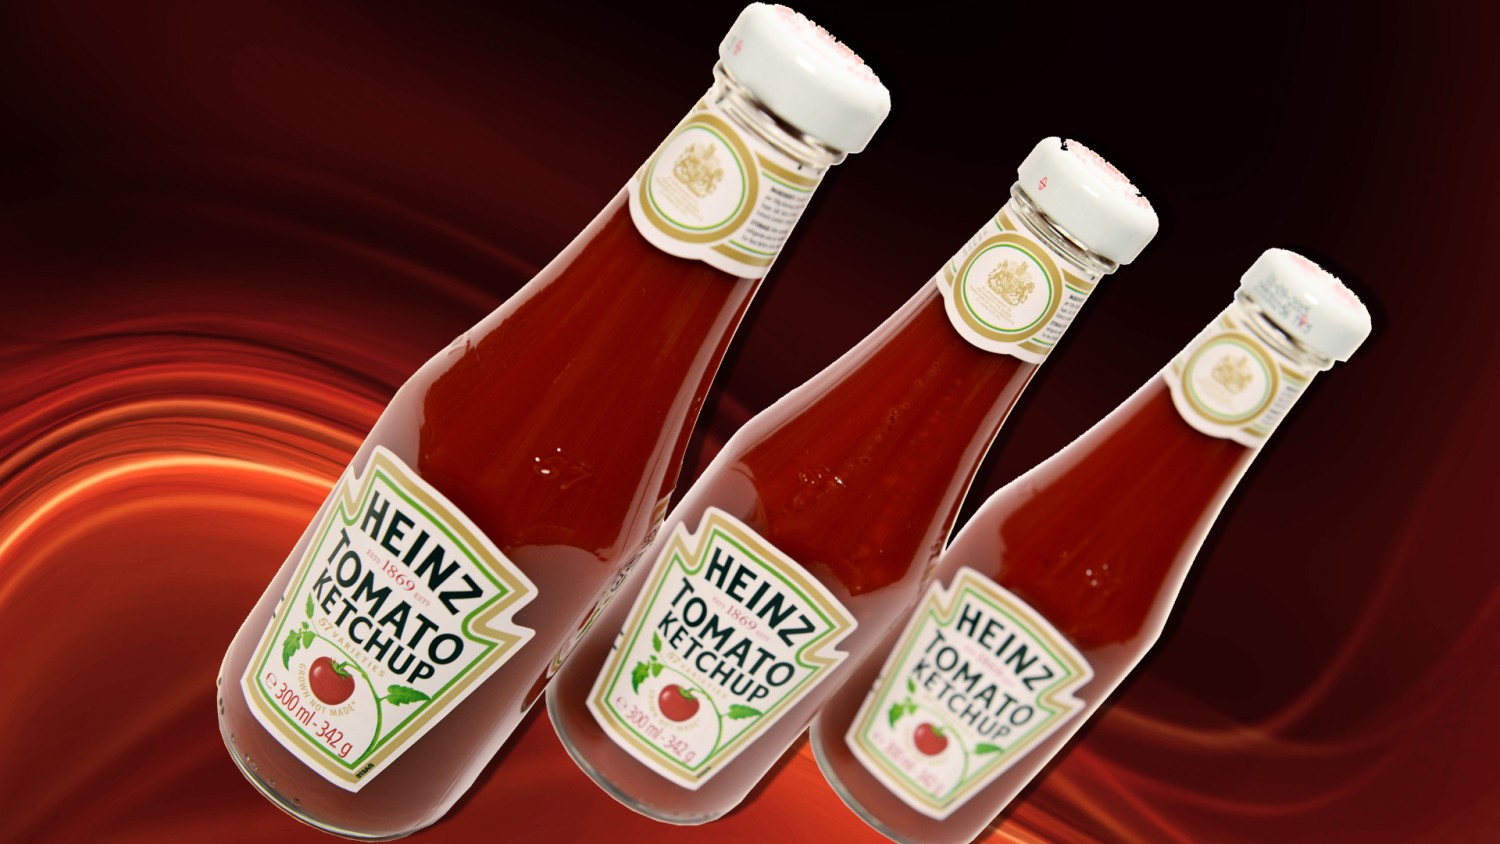 https://media-cldnry.s-nbcnews.com/image/upload/t_fit-1500w,f_auto,q_auto:best/newscms/2017_43/1291706/heinz-ketchup-today-171026-tease-02.jpg